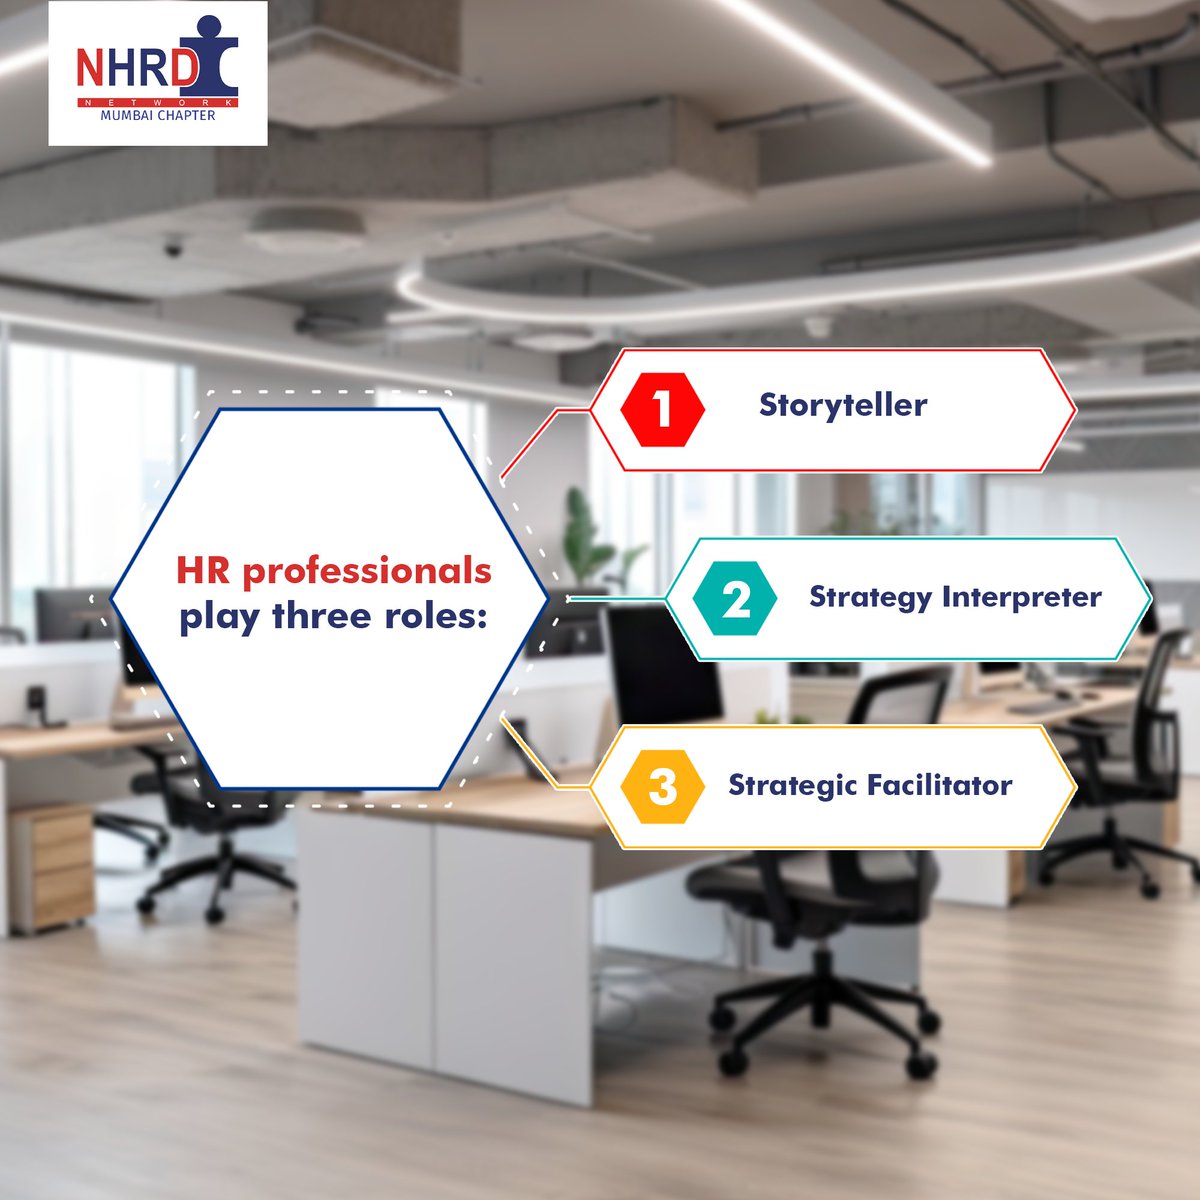 The role of a HR professional has a versatile spectrum of responsibilities! #NHRDN #HR #HRDepartment #Quote #HRQuotes #NHRDNMumbai #Leadership #Growing #Success